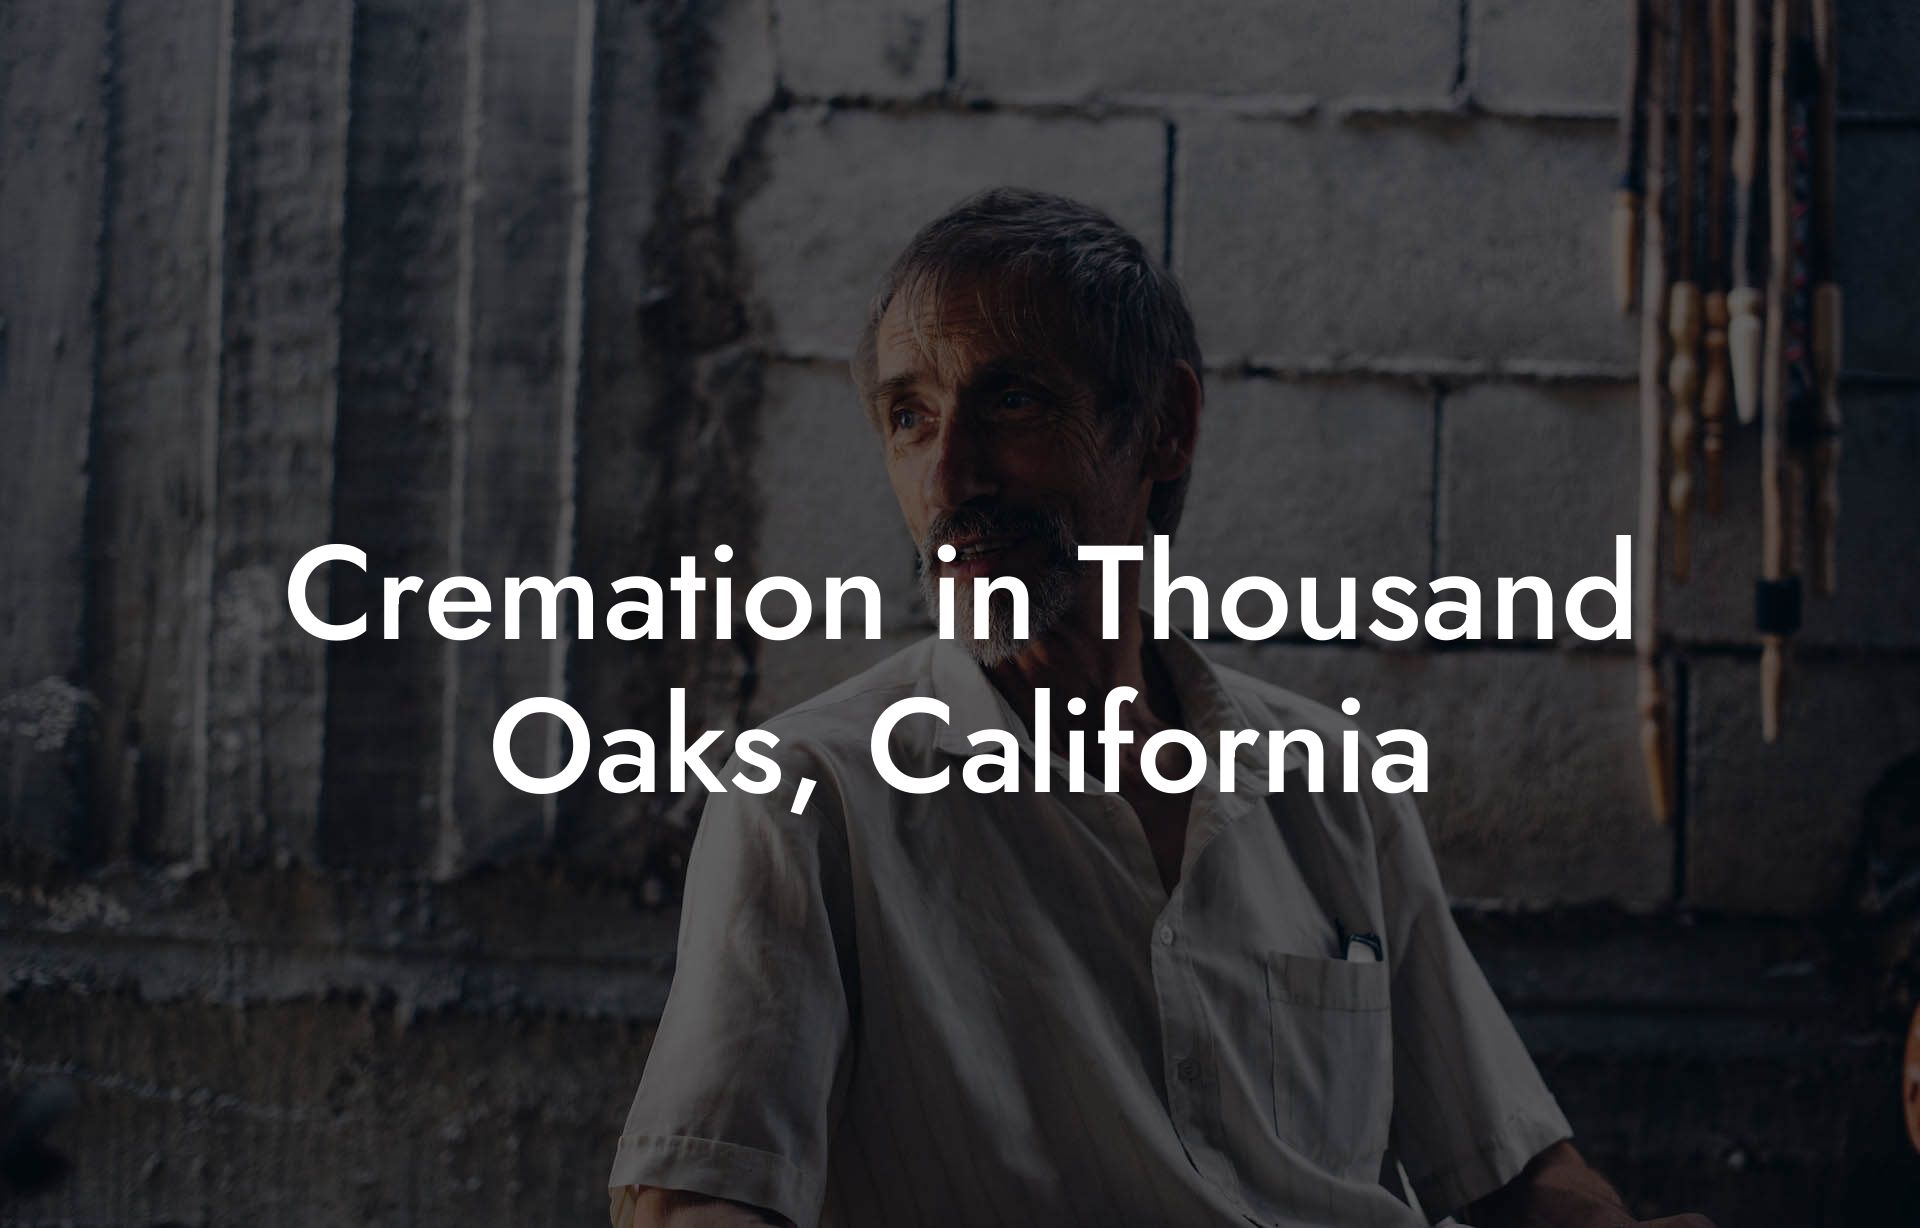 Cremation in Thousand Oaks, California